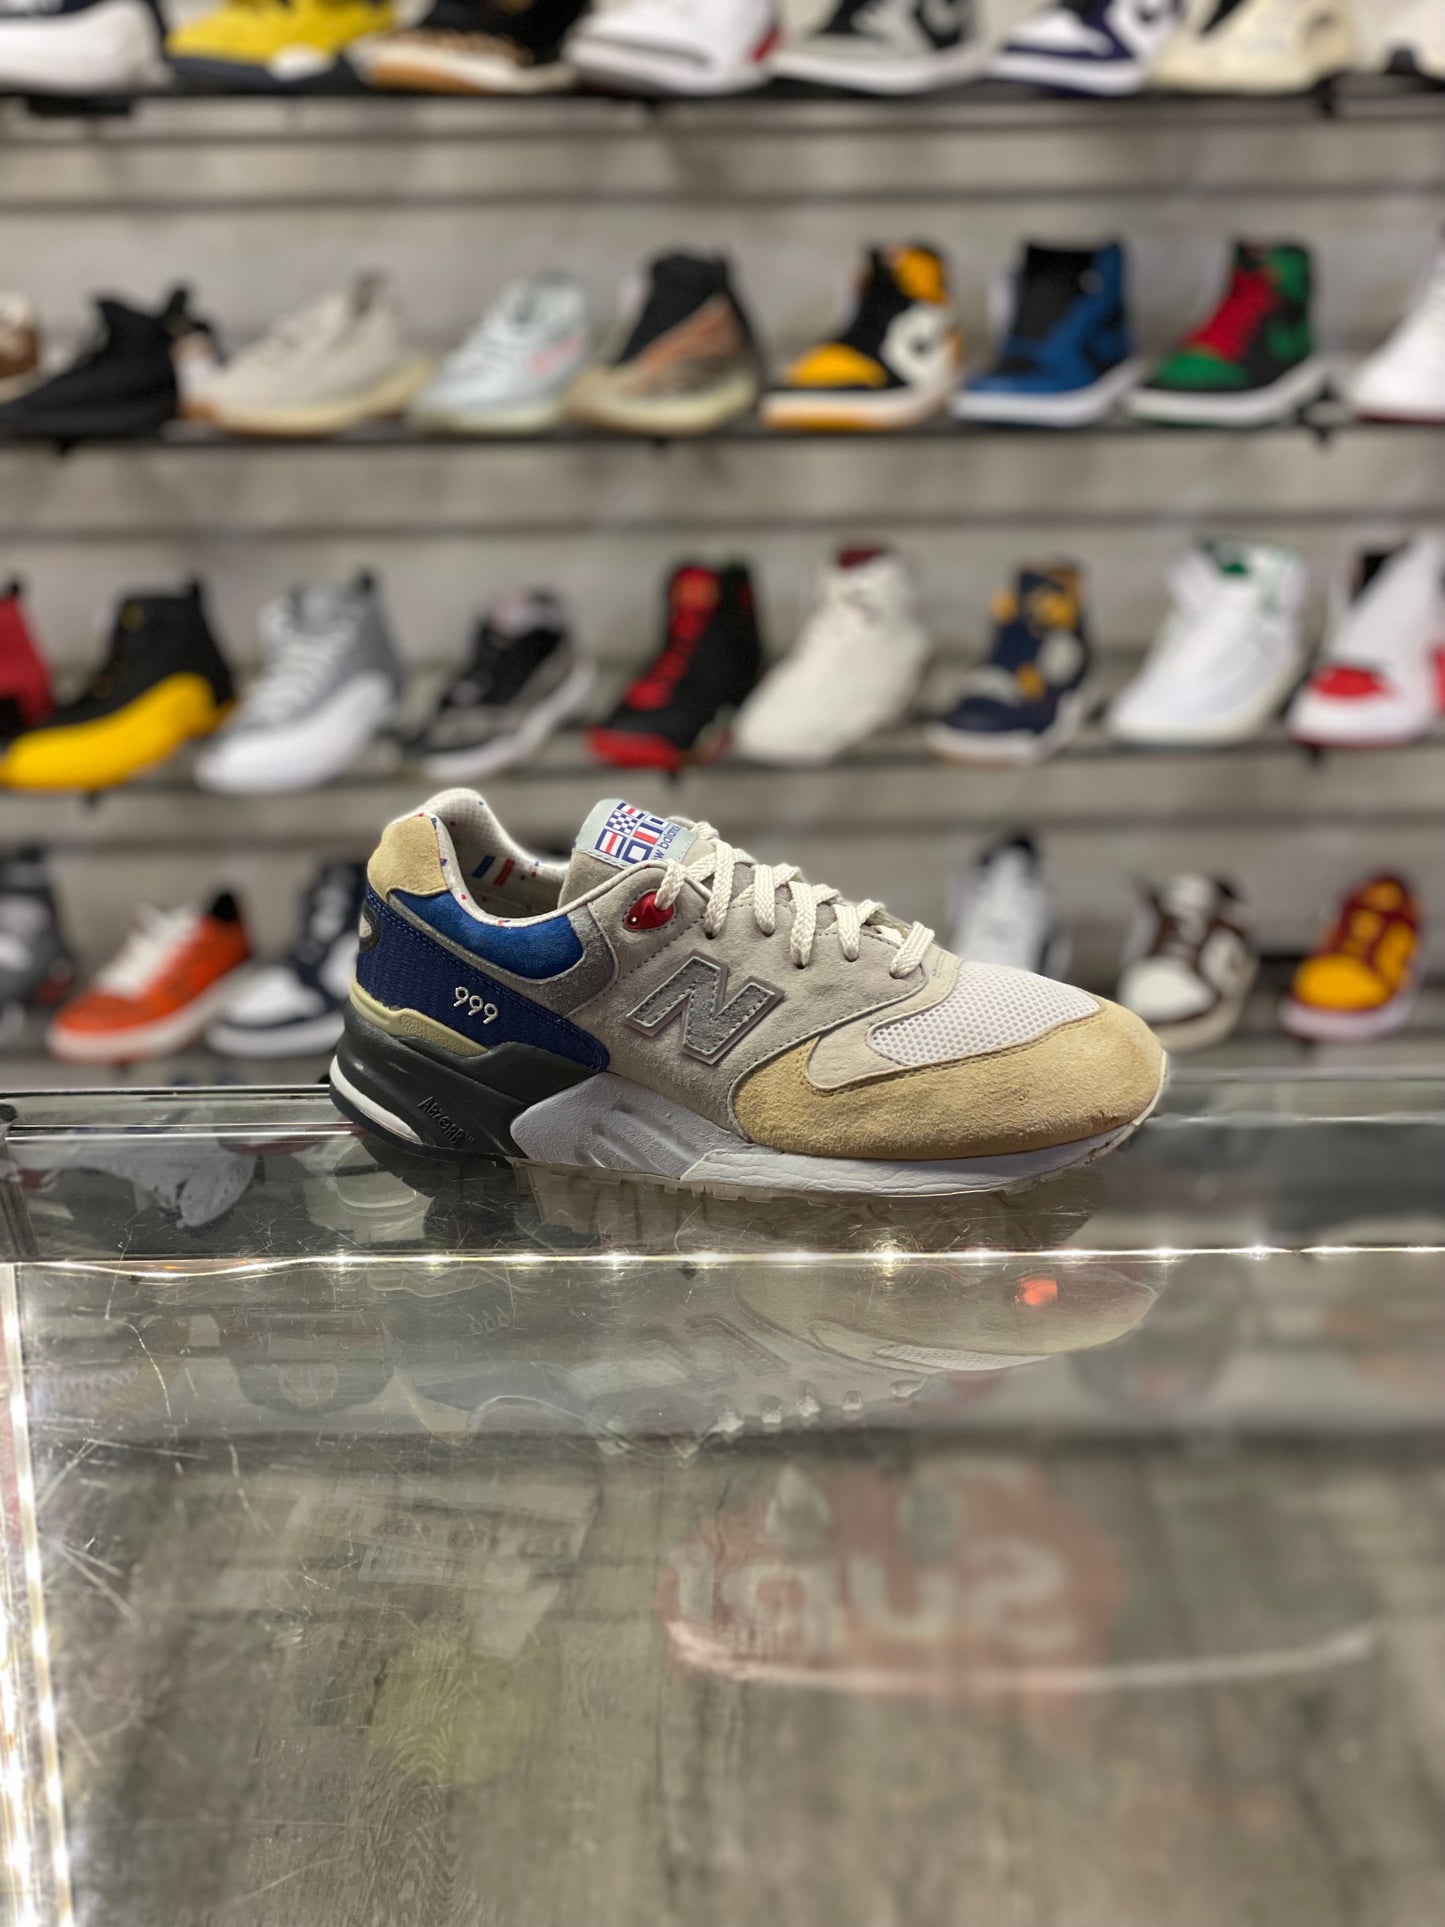 Concepts Kennedy New Balance 999 Sample